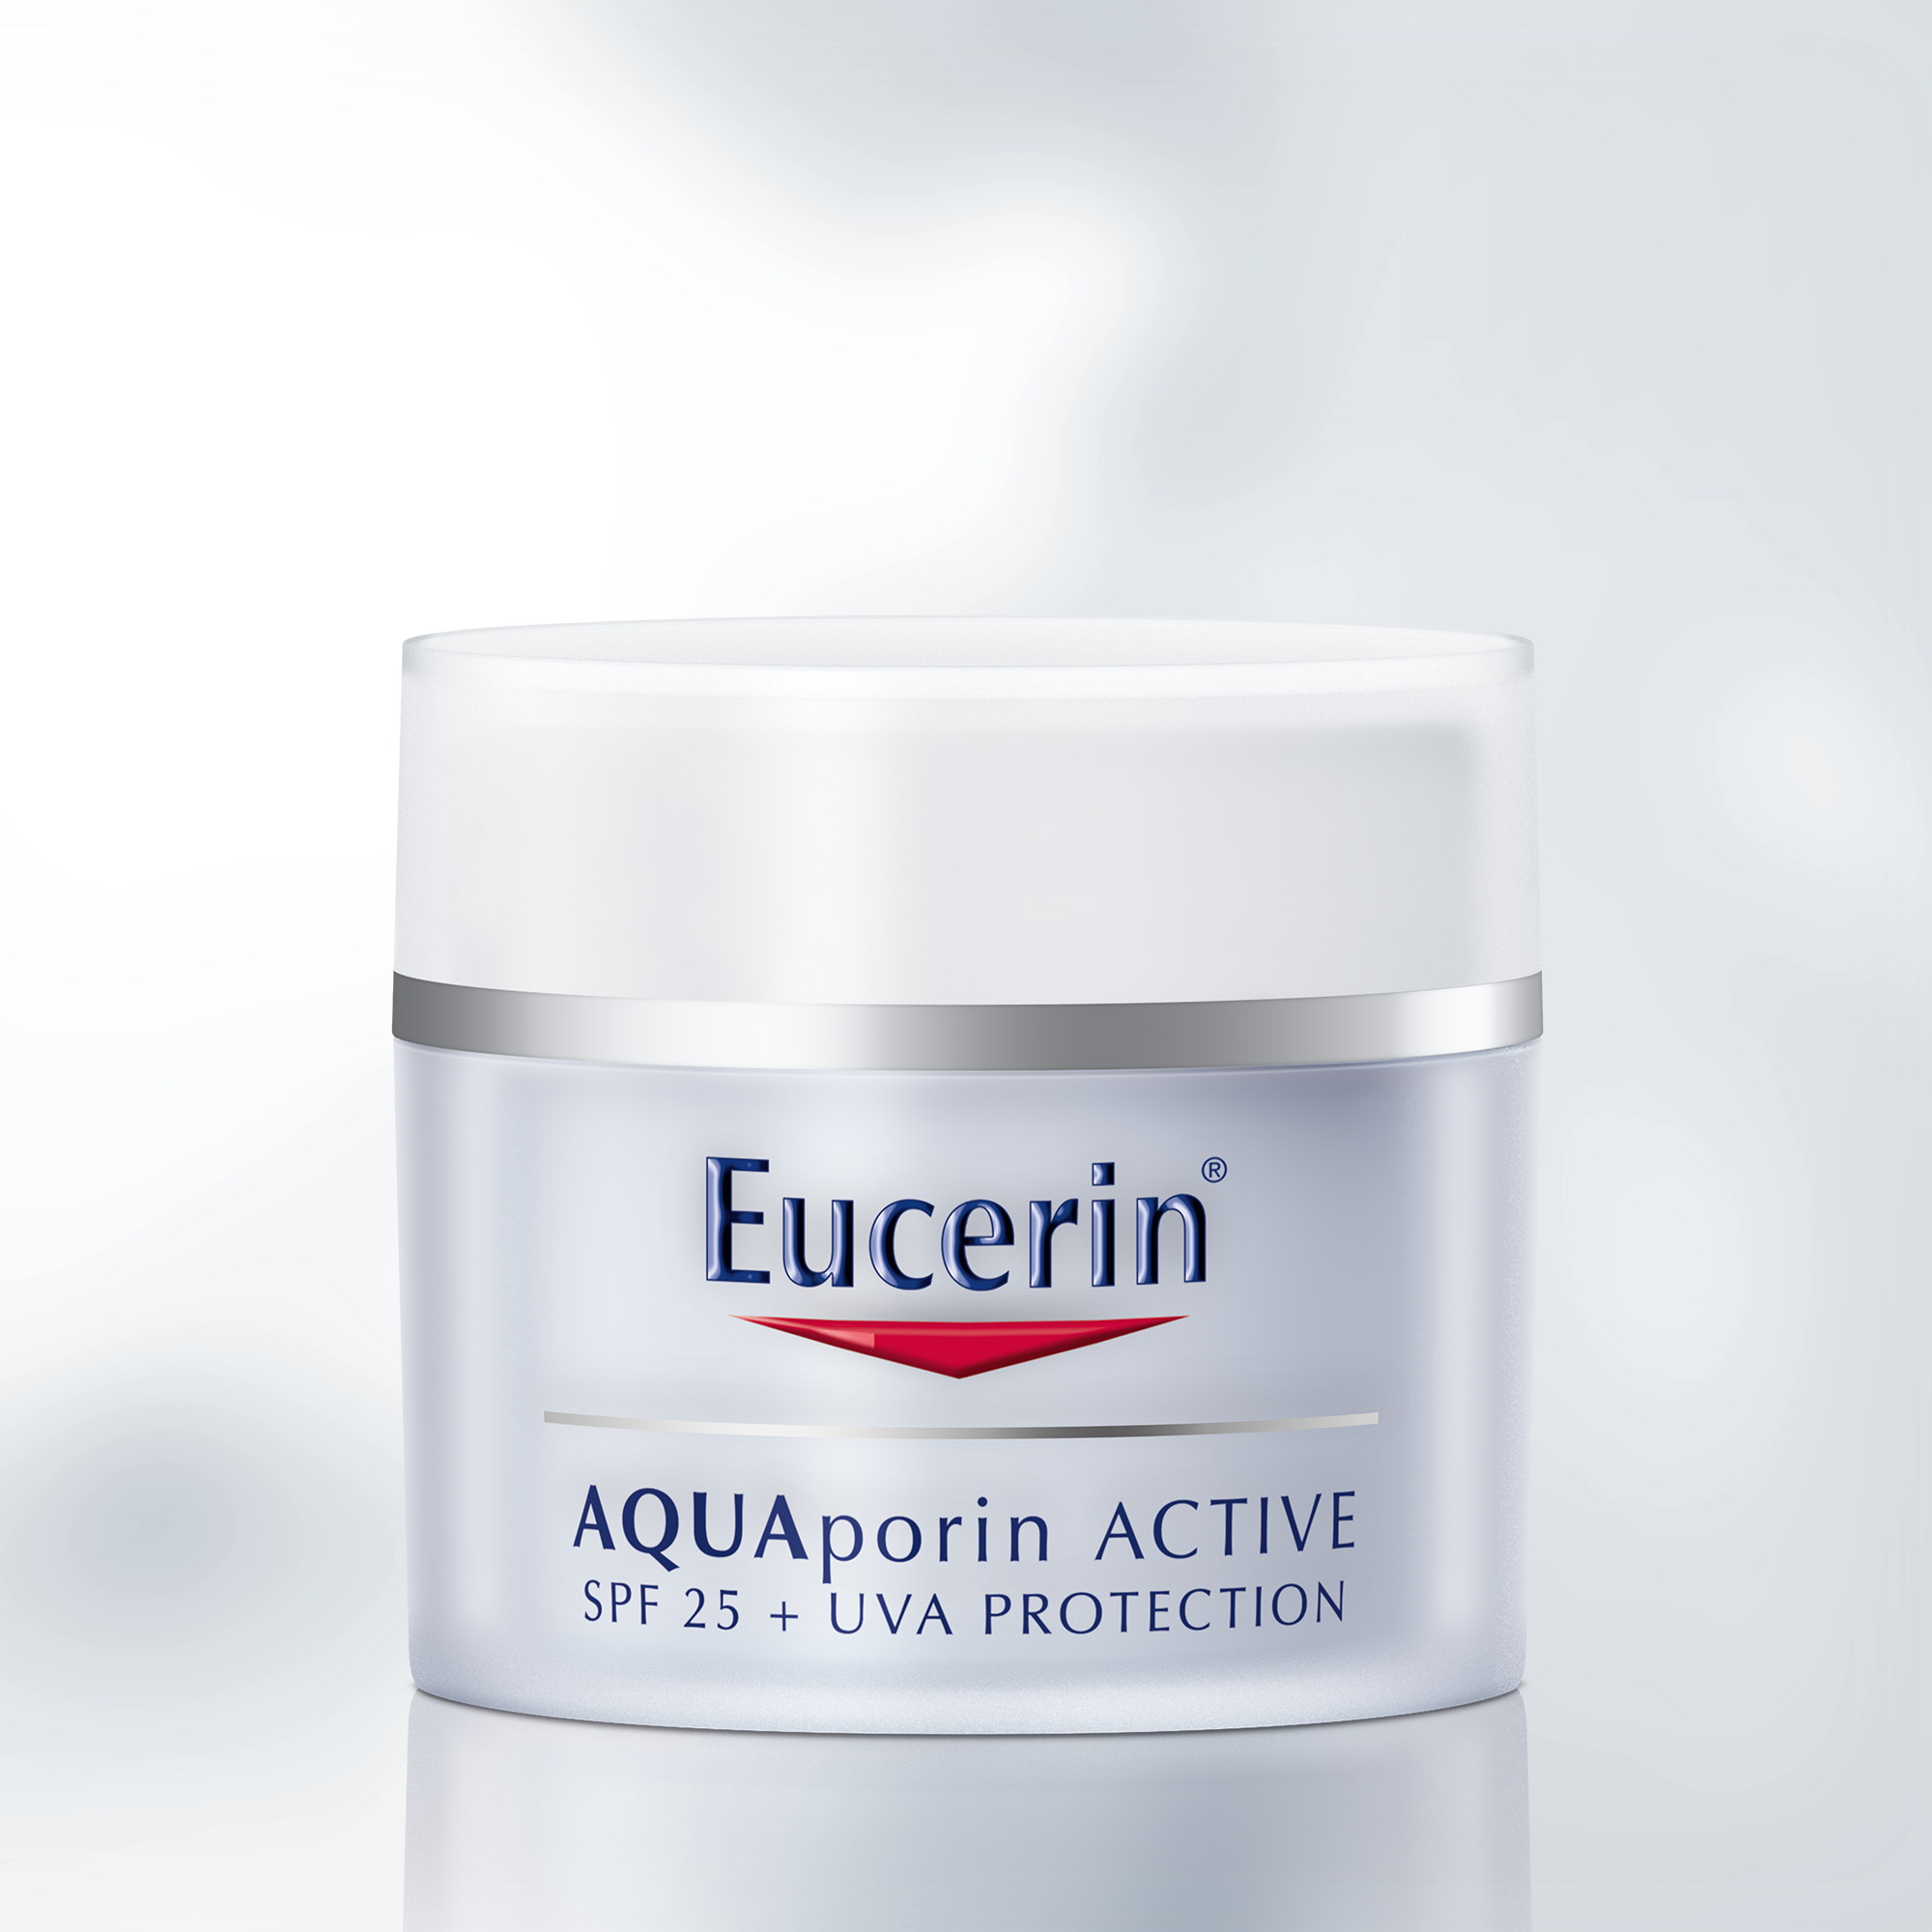 Eucerin AQUAporin ACTIVE with SPF 25